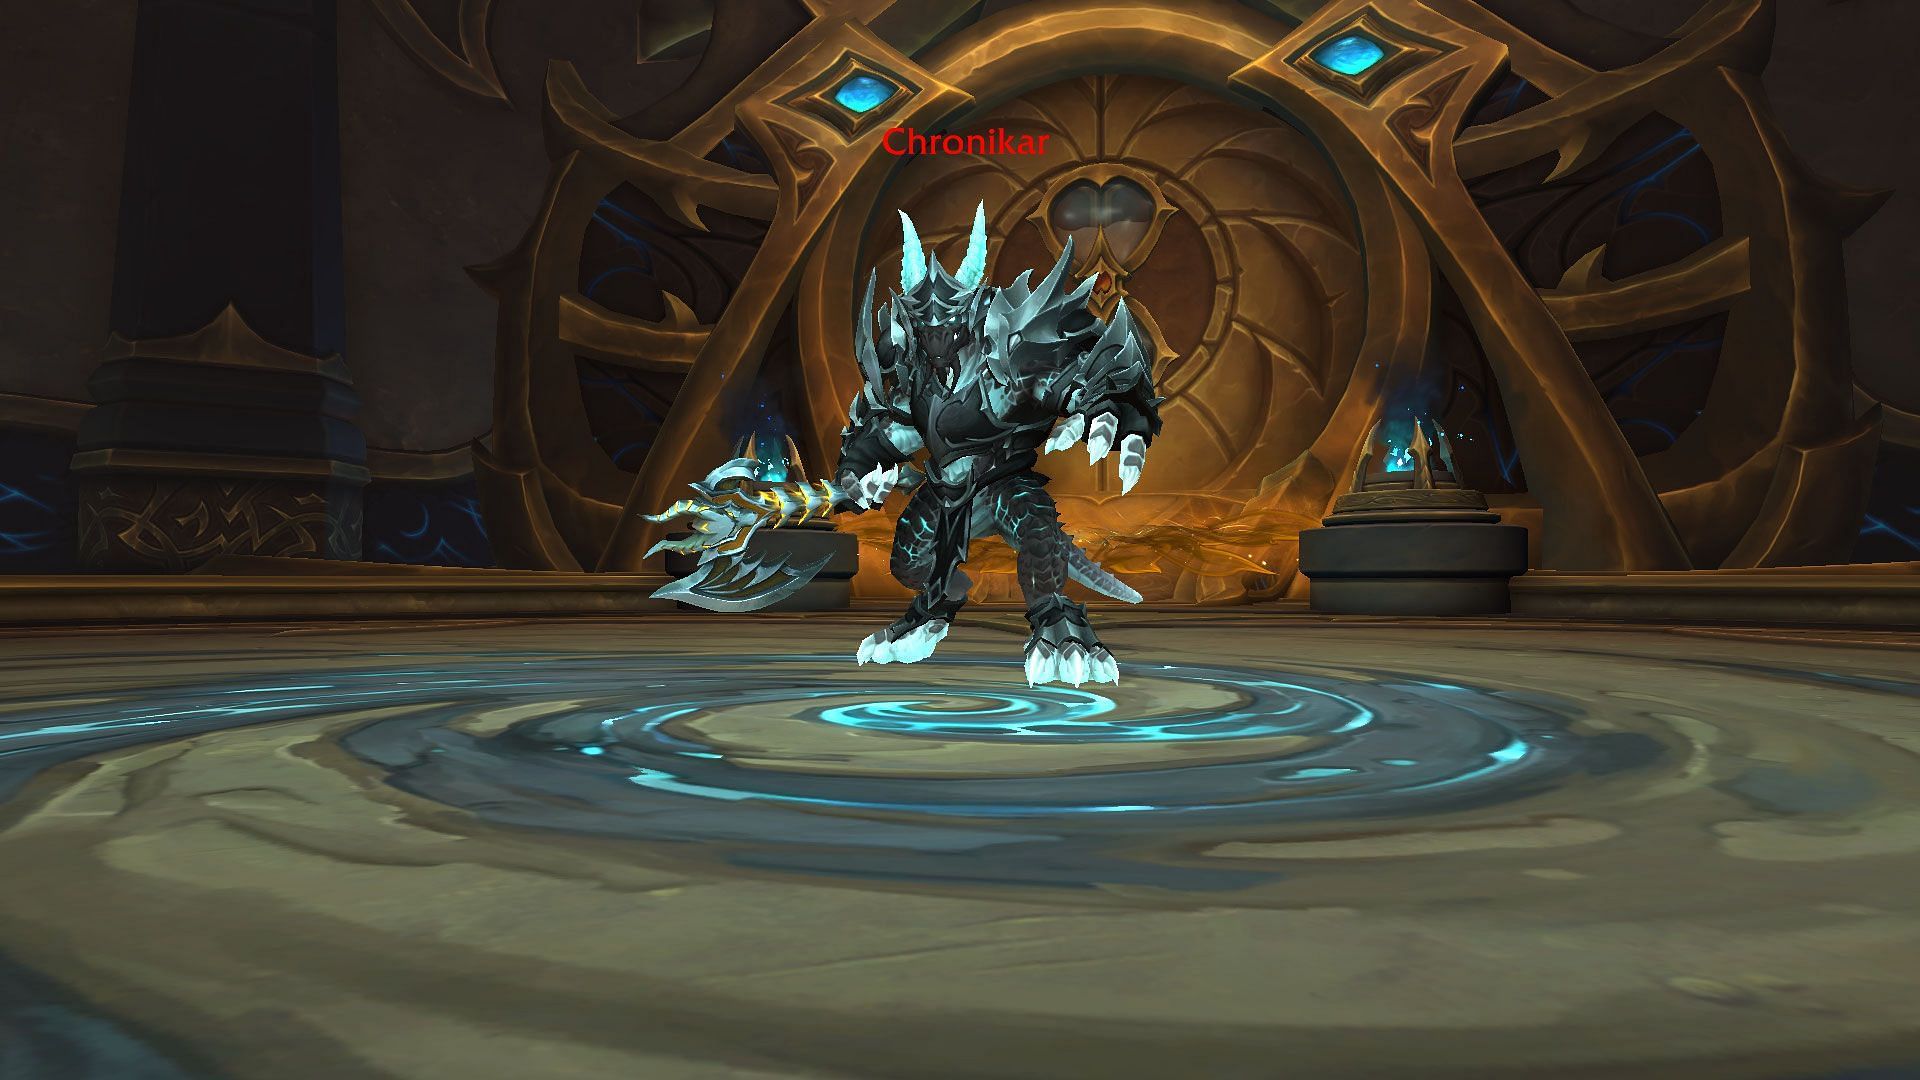 Chronikar is one of the Dawn of the Infinite bosses carrying Divergent gear (Image via Blizzard Entertainment)